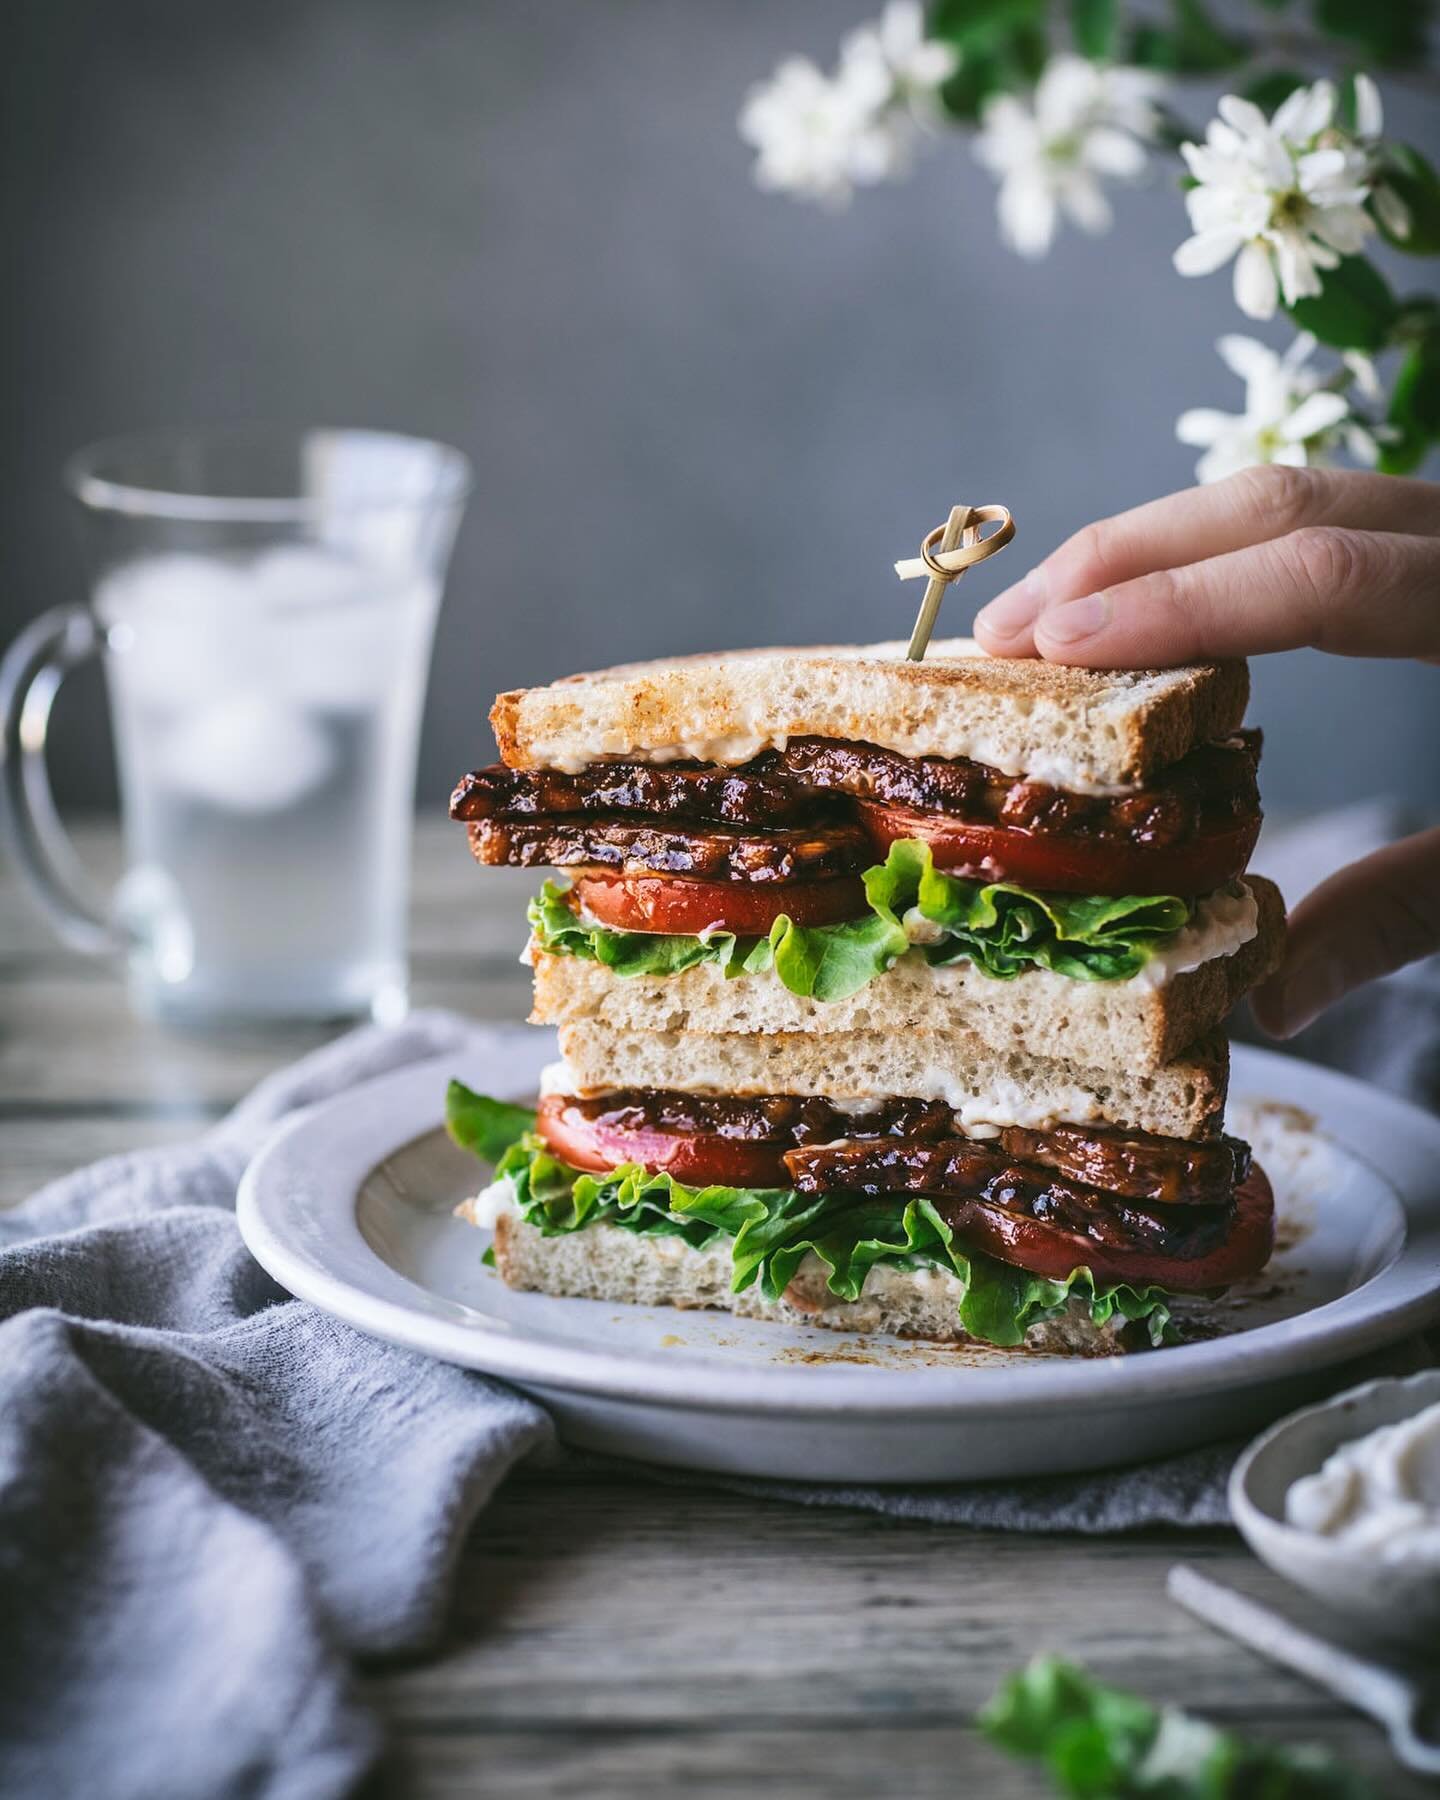 Have you ever had a sandwich moment? (yup, it&rsquo;s a thing)🙌🏼 When you take a bite of something so delicious your entire world melts away and all you can think about is taking another bite. 🥪Get ready my friend this is your sandwich moment! 

V